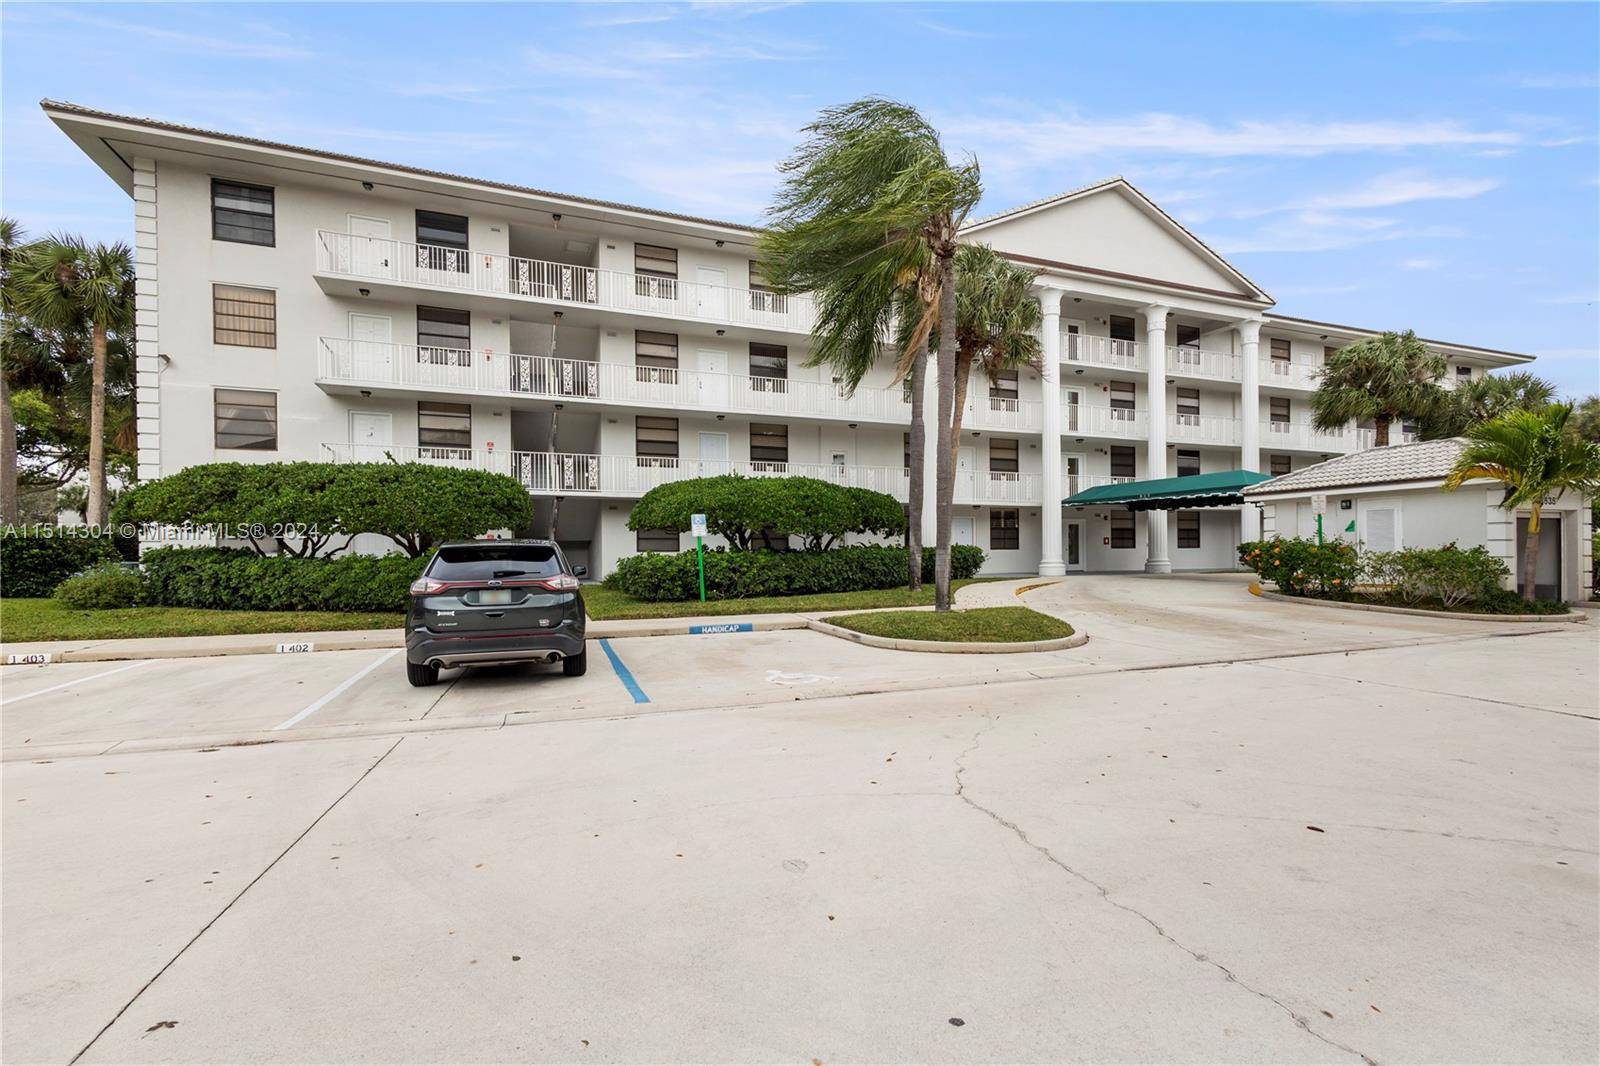 This beautiful apt is move in ready with updates that prioritize elegance, security hurricane proof windows, and high quality finishes 75, 000 spent in renovation.